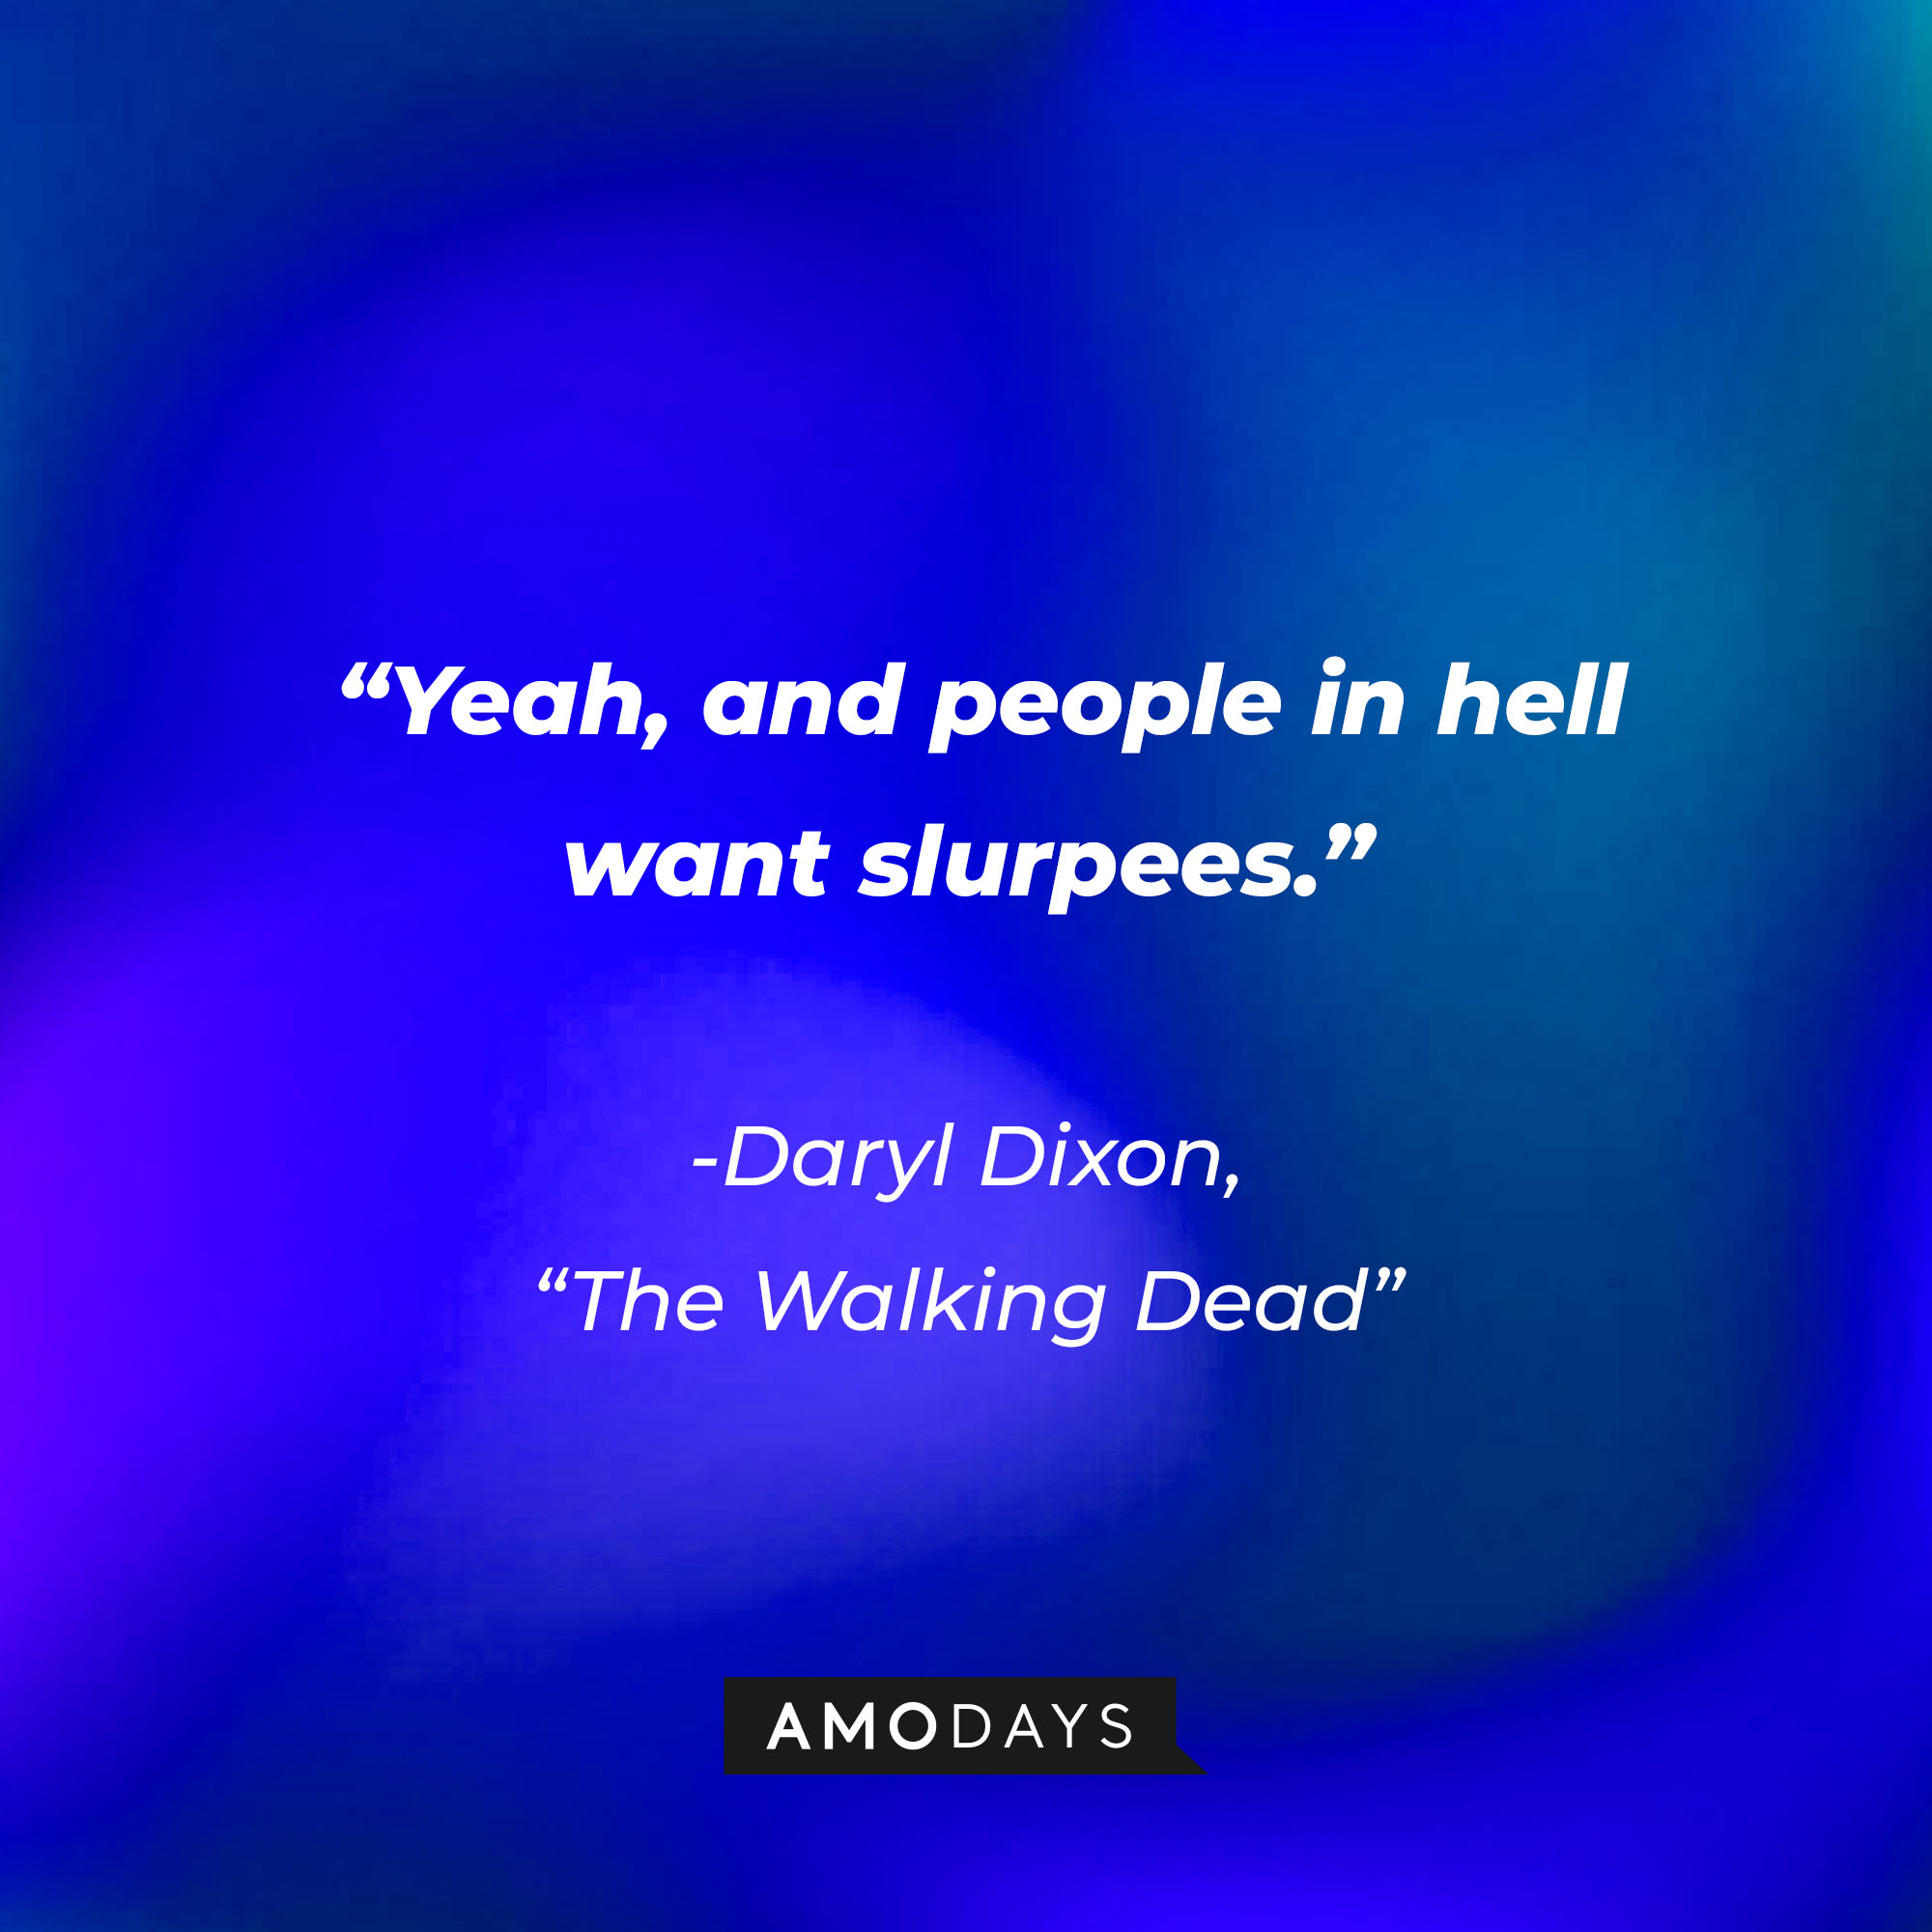 Daryl Dixon’s quote from “The Walking Dead”: “Yeah, and people in hell want slurpees.” | Source: AmoDays